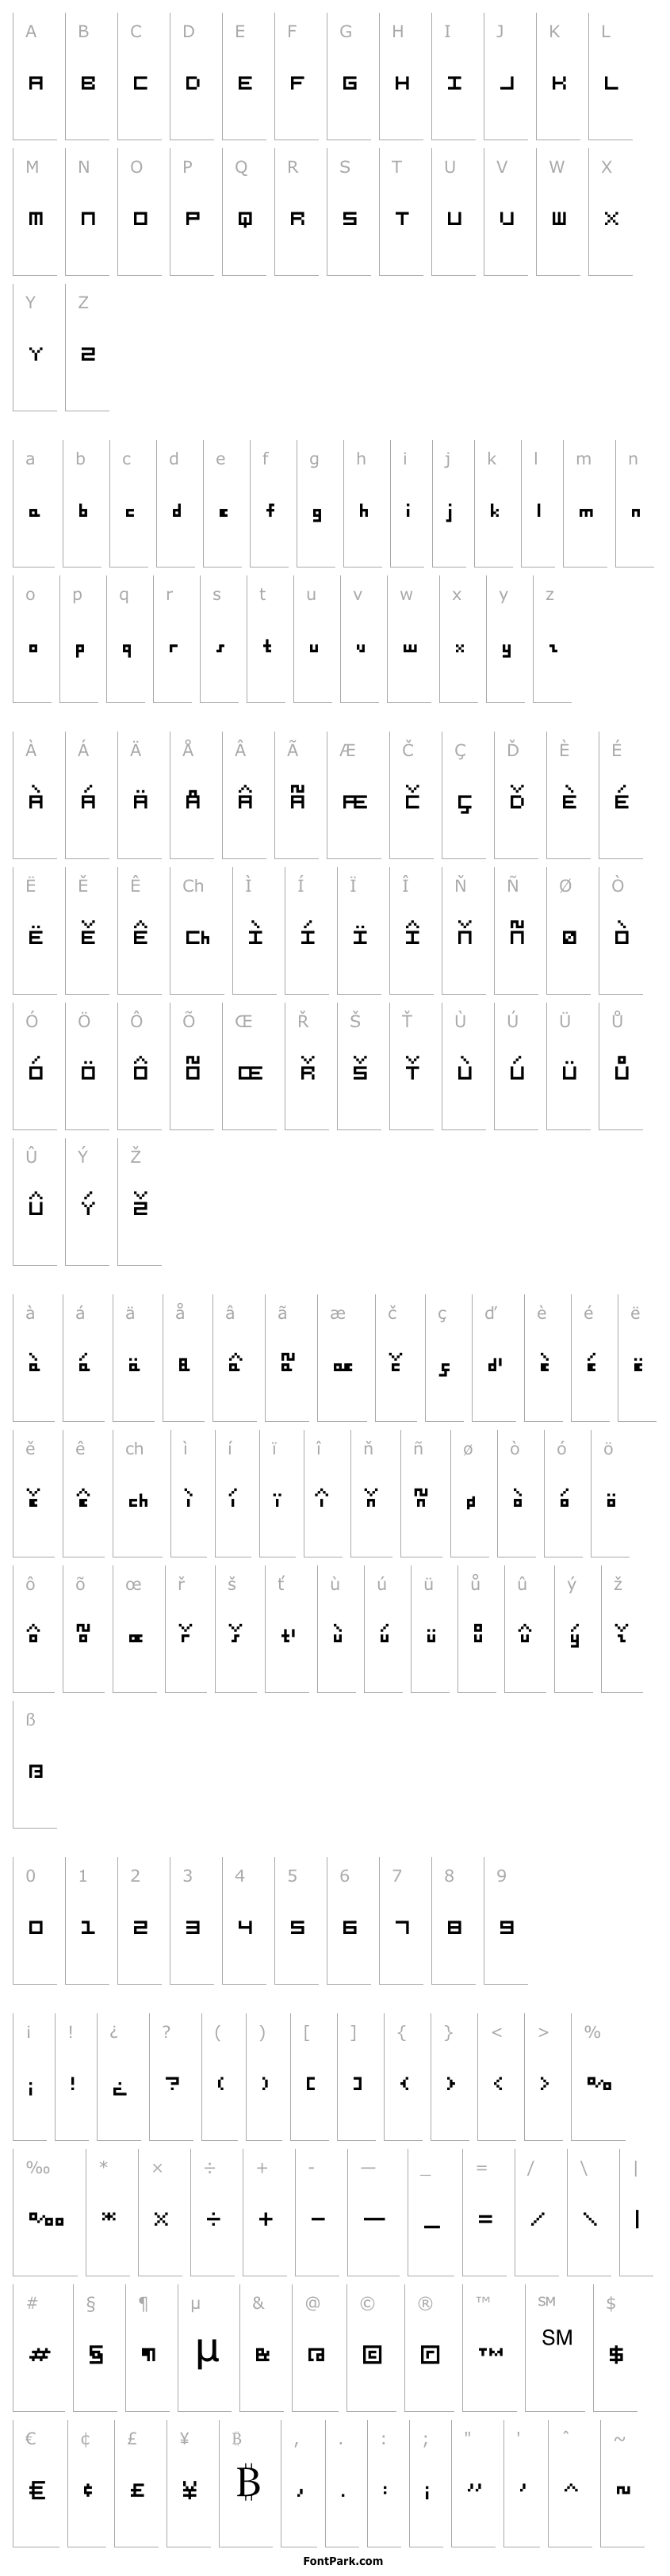 Overview Heytext